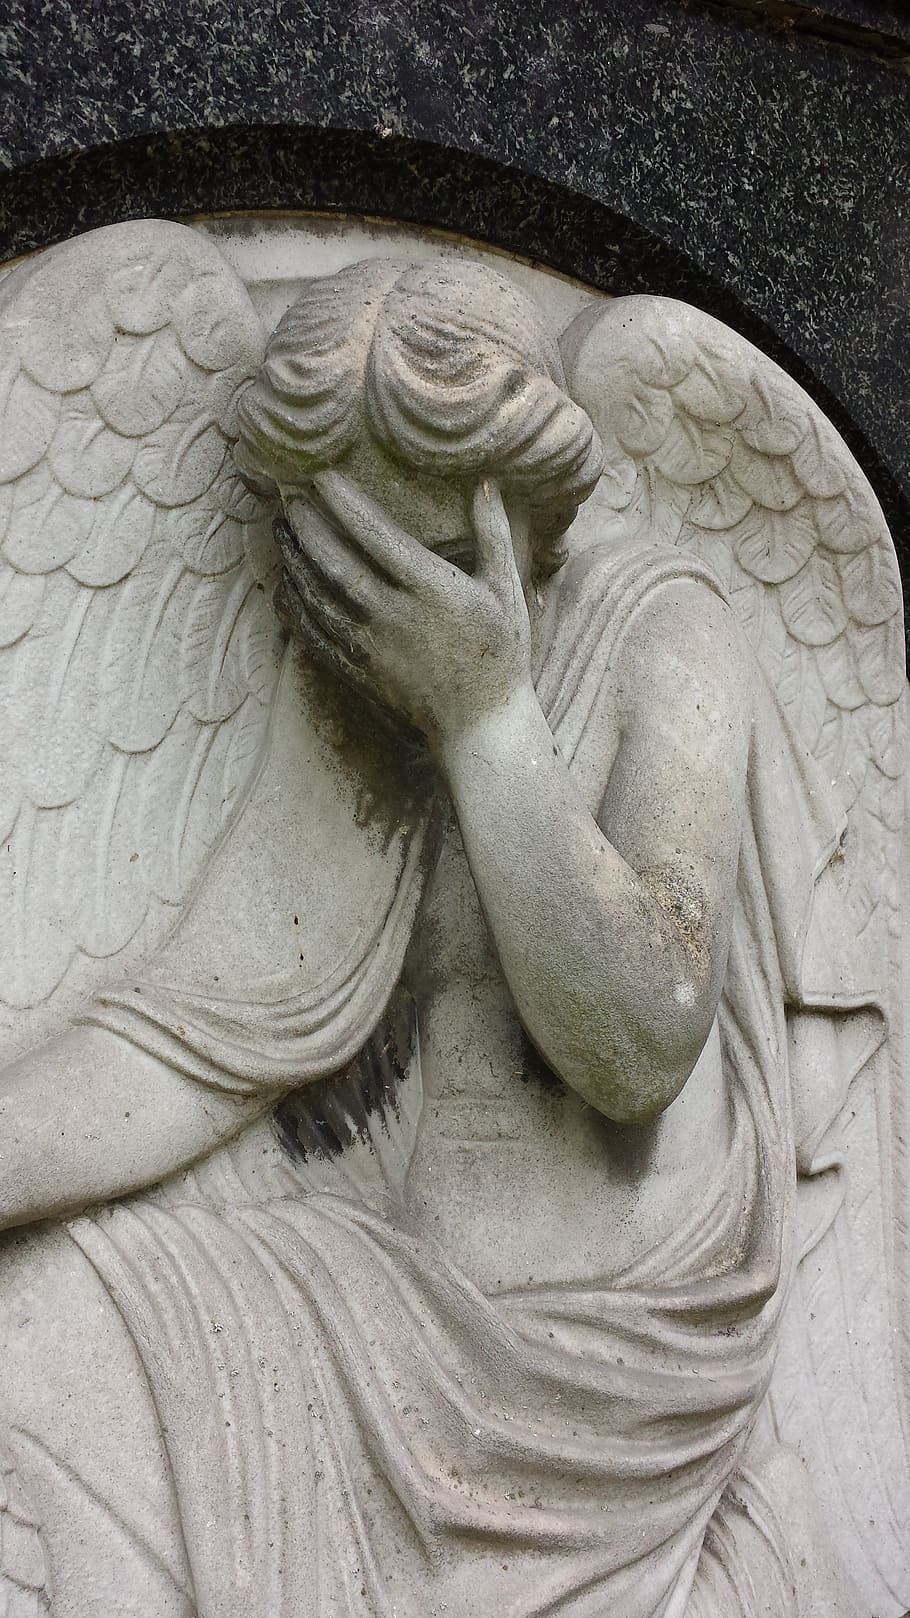 female, angel, covering, face statue, angel figure, tears, cemetery, stone, statue, mourning